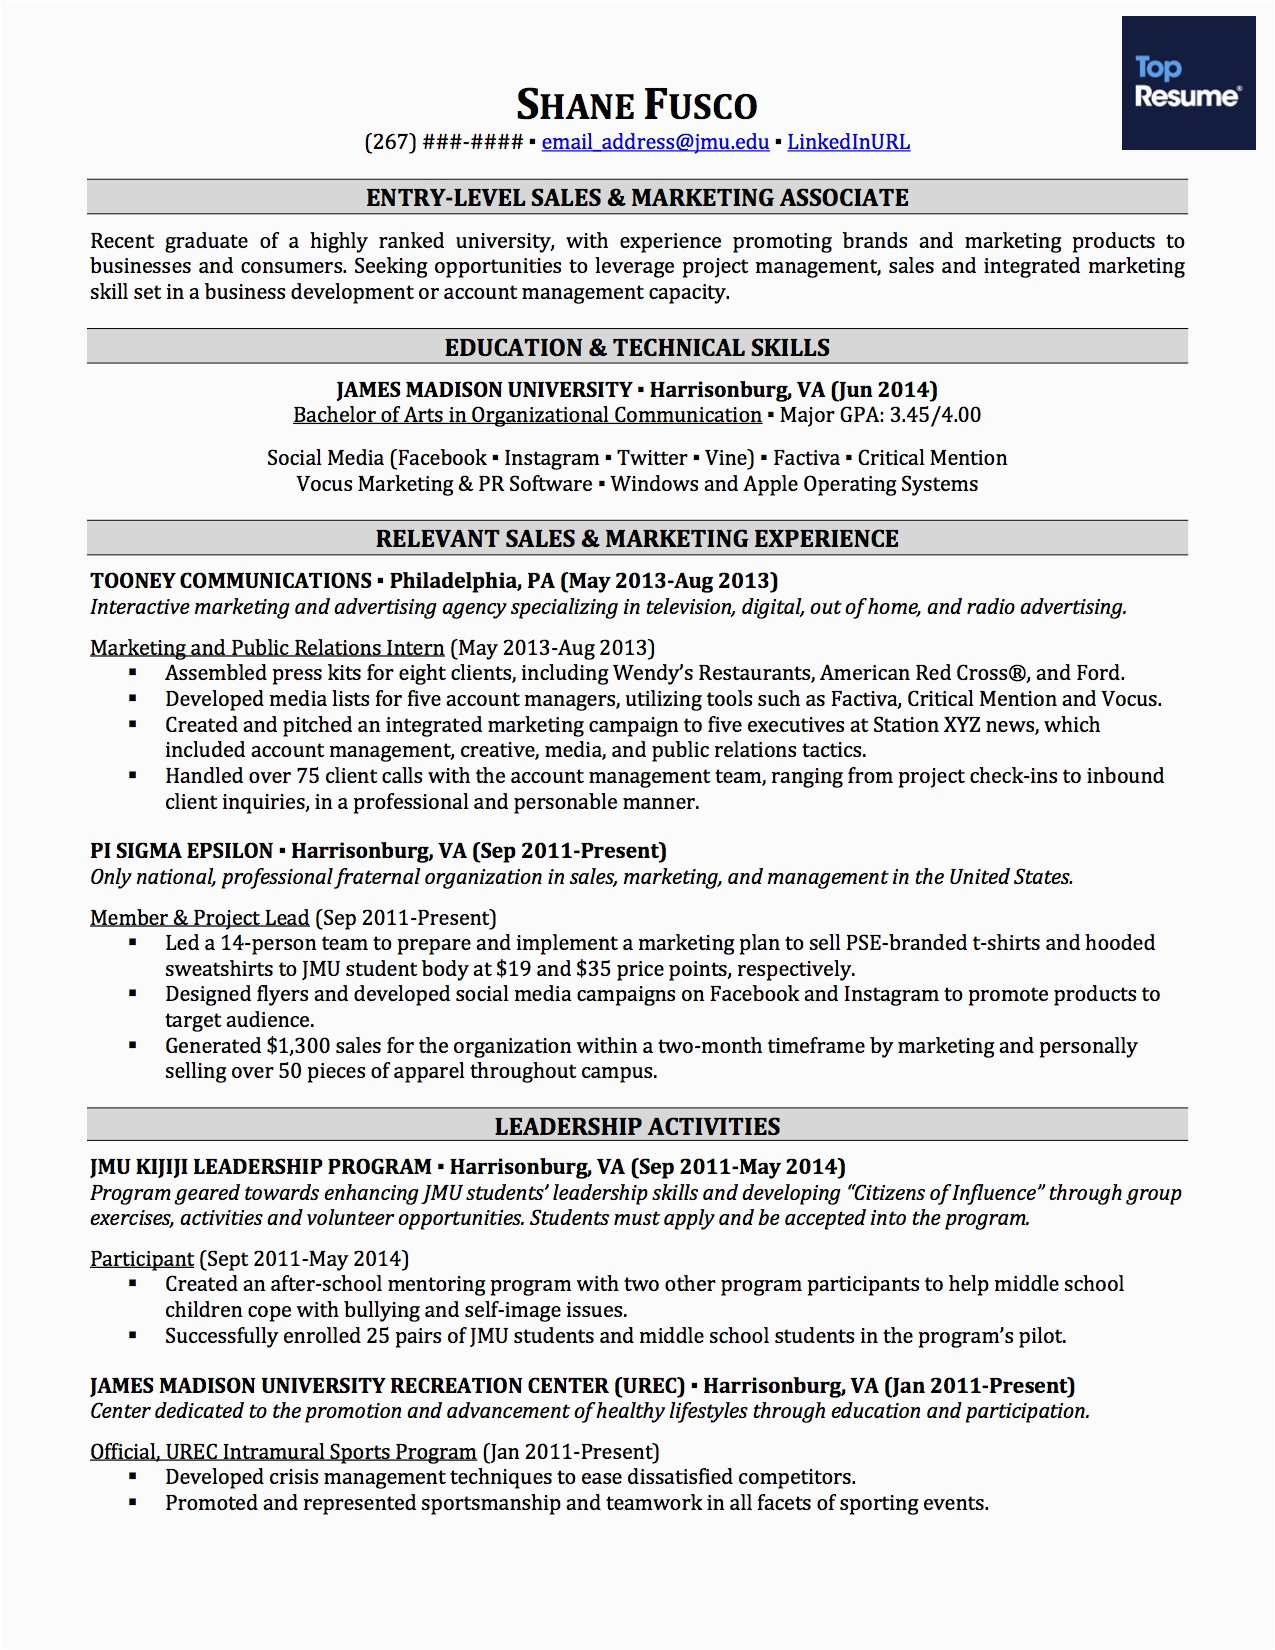 Sample Resume Objectives for No Work Experience How to Write A Resume with No Job Experience